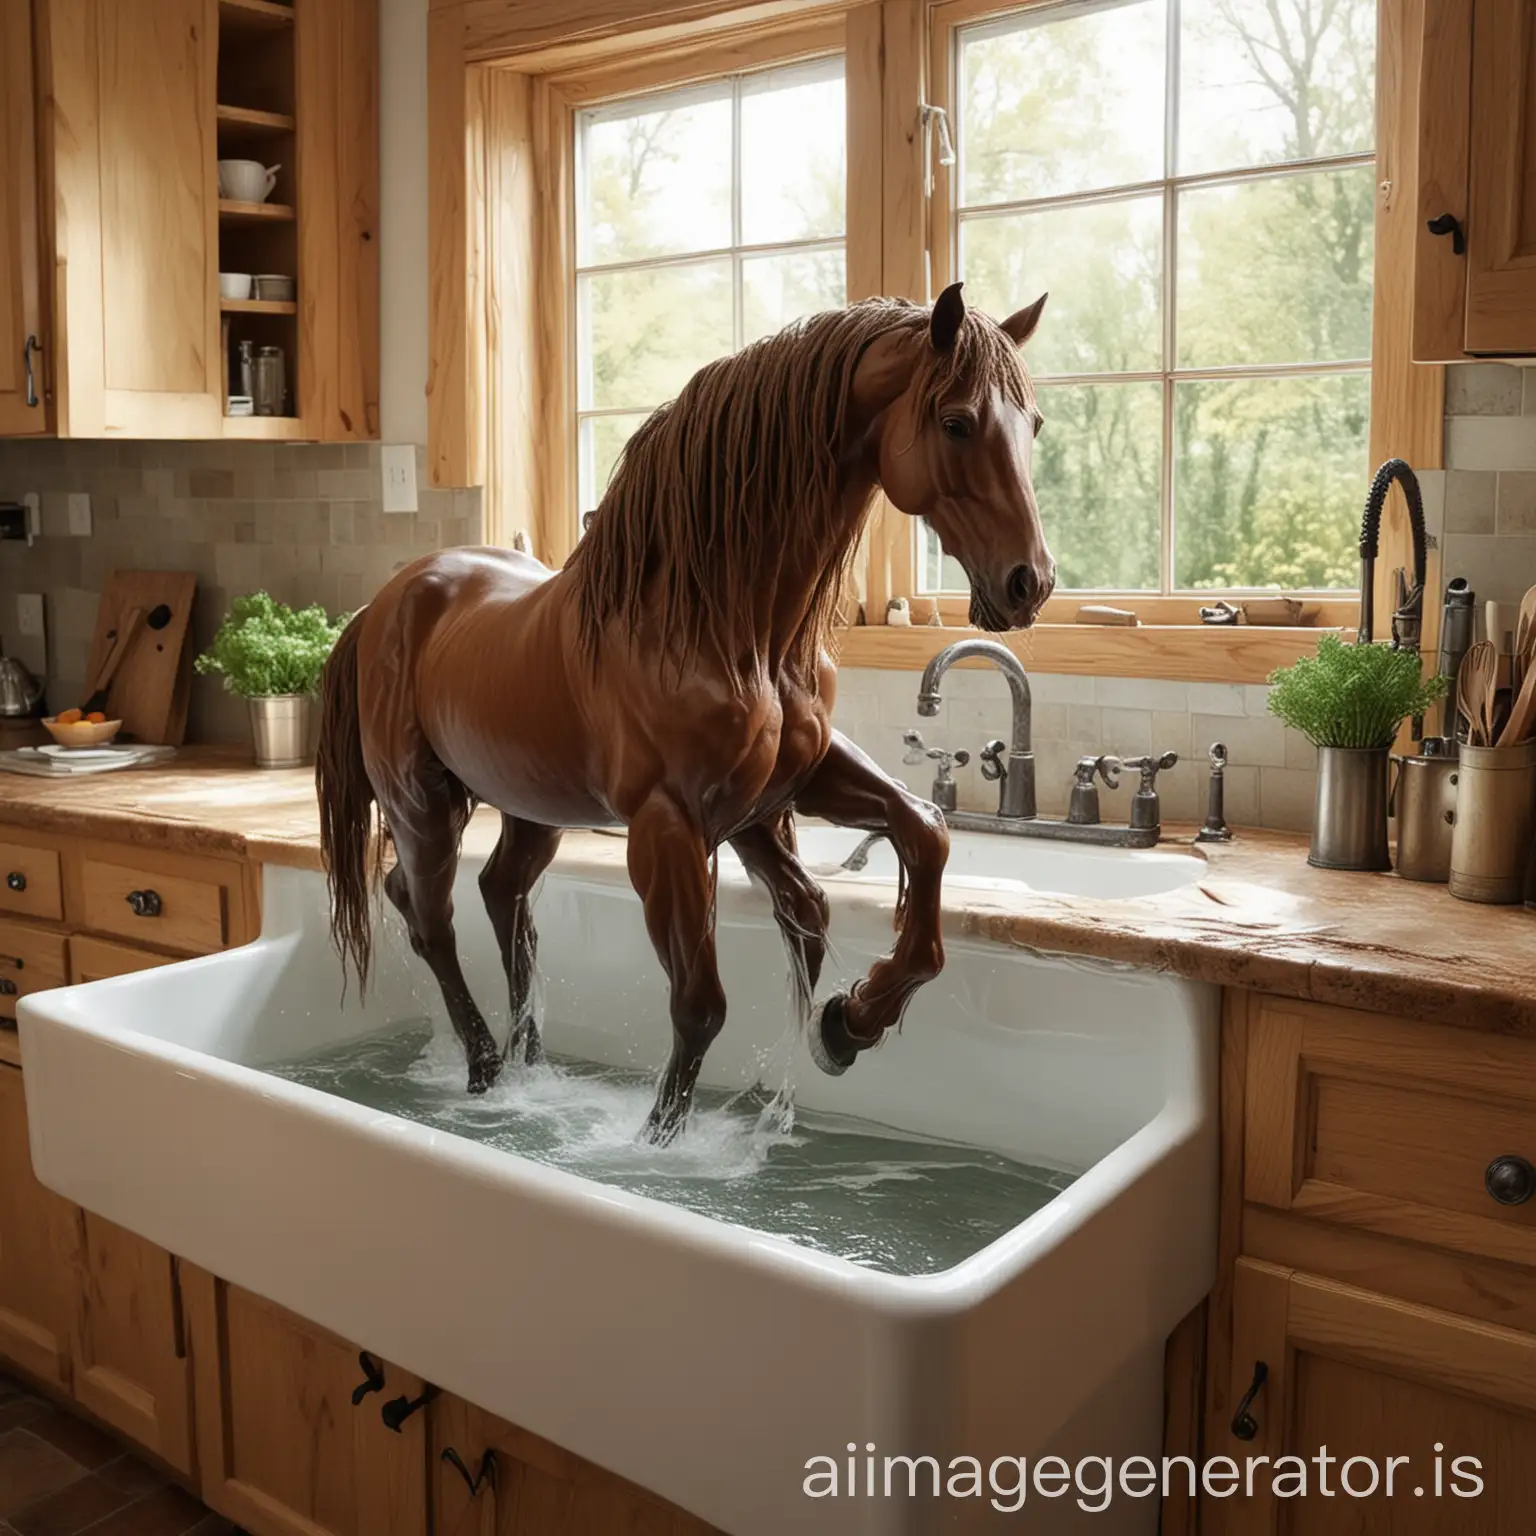 Create an image of a sentient kitchen transforming itself into a horse. The kitchen should have cabinets, appliances, and utensils that are rearranging and morphing into the shape and form of a horse. Show the countertops and drawers turning into the horse's body, while the oven and refrigerator form its legs. The sink and faucet should become the horse's head, with water flowing to resemble a mane. The overall scene should have a magical, surreal feel, with elements of both the kitchen and the horse clearly visible in the transformation process.